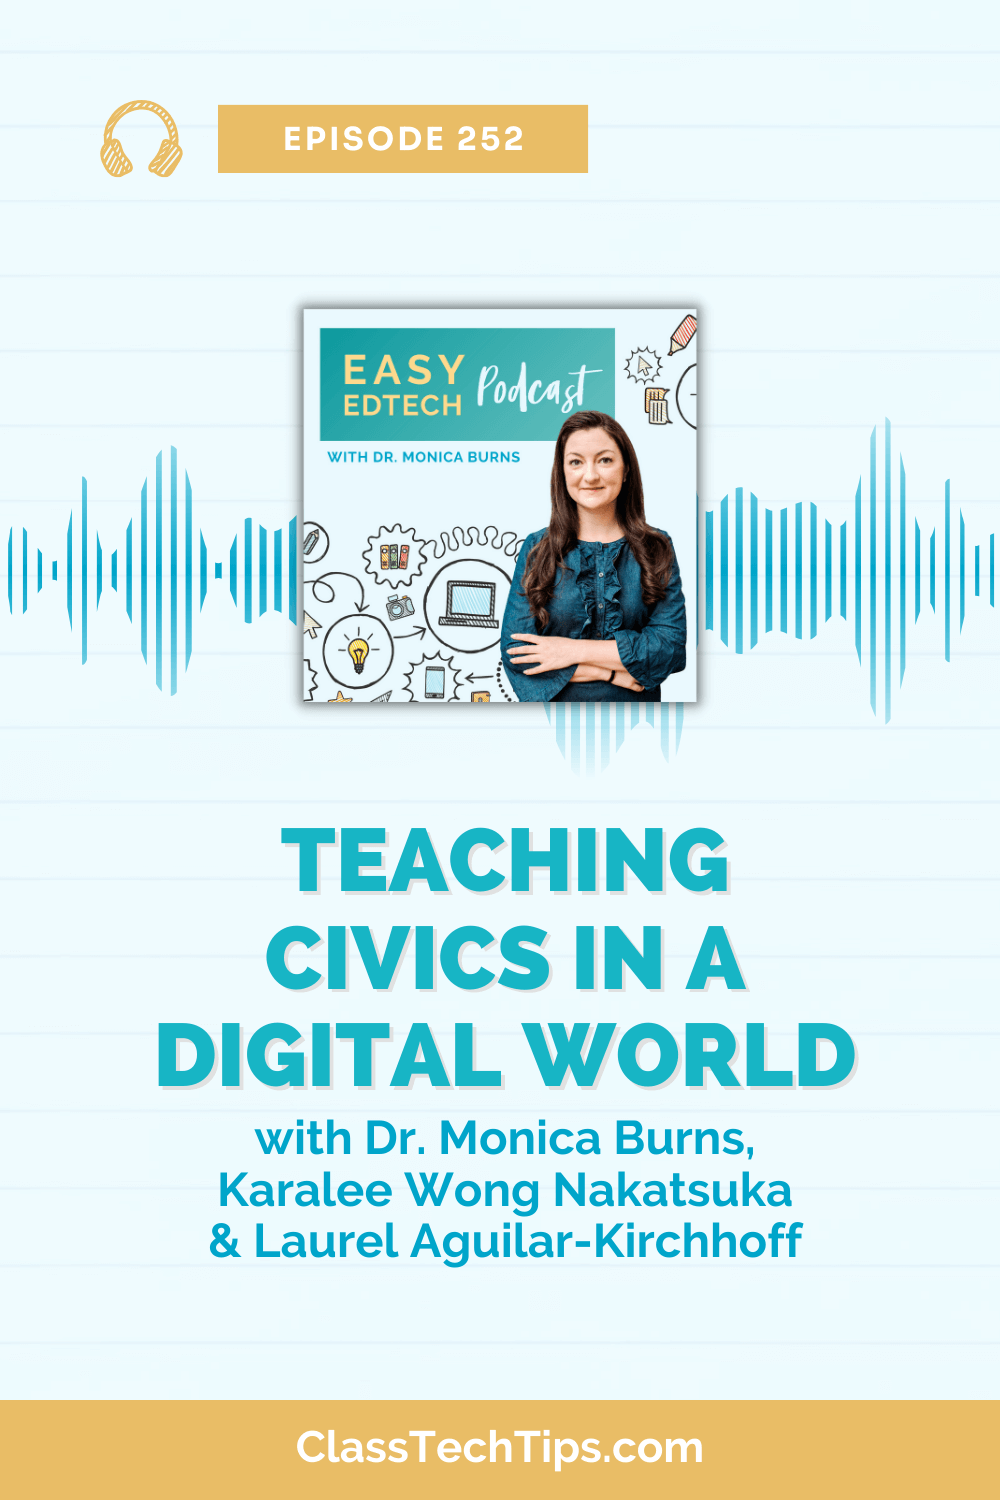 Featured image for podcast episode, showing Karalee Wong Nakatsuka and Laurel Aguilar-Kirchhoff with a backdrop of diverse students engaged in a classroom discussion about civics and EdTech.